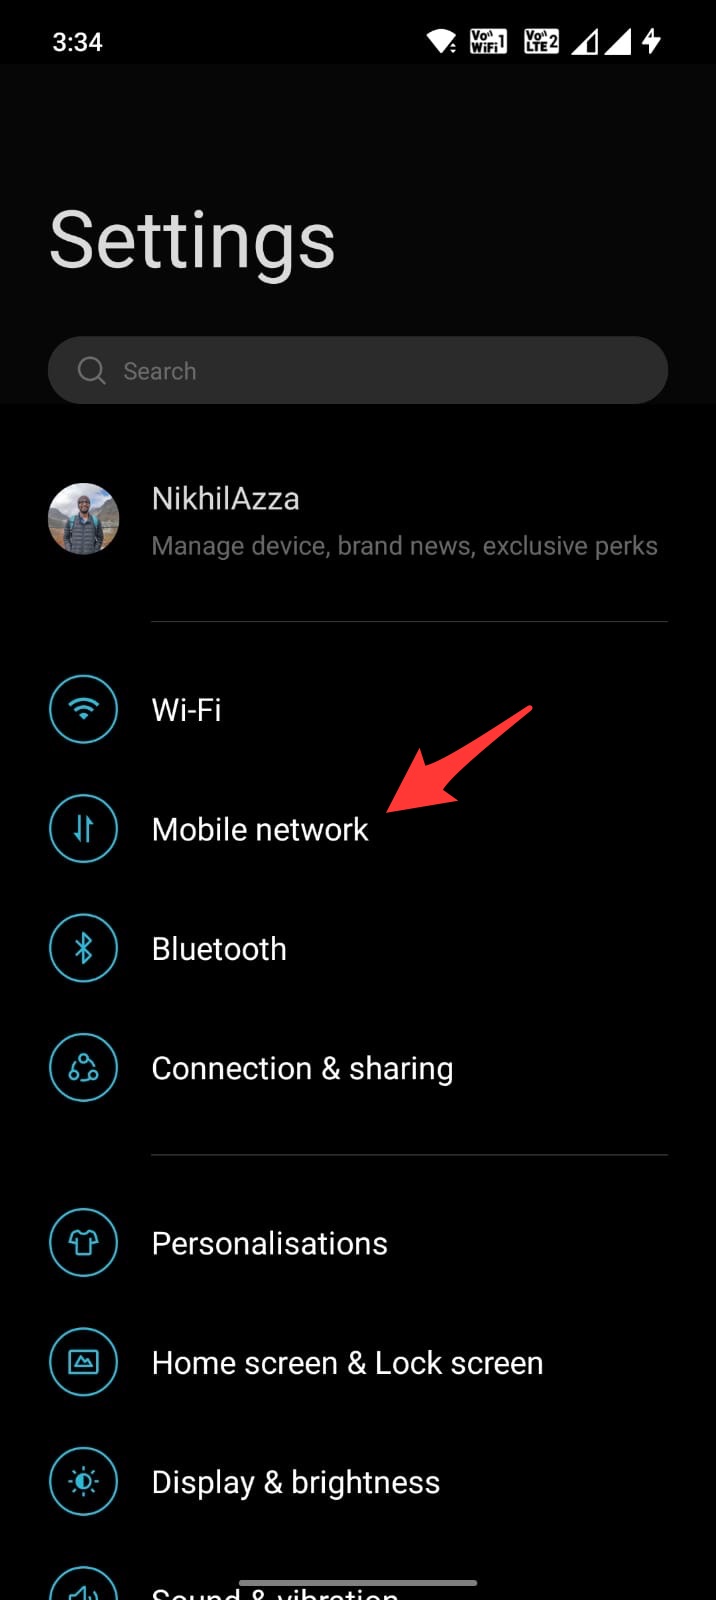 Mobile_network_Android_Settings